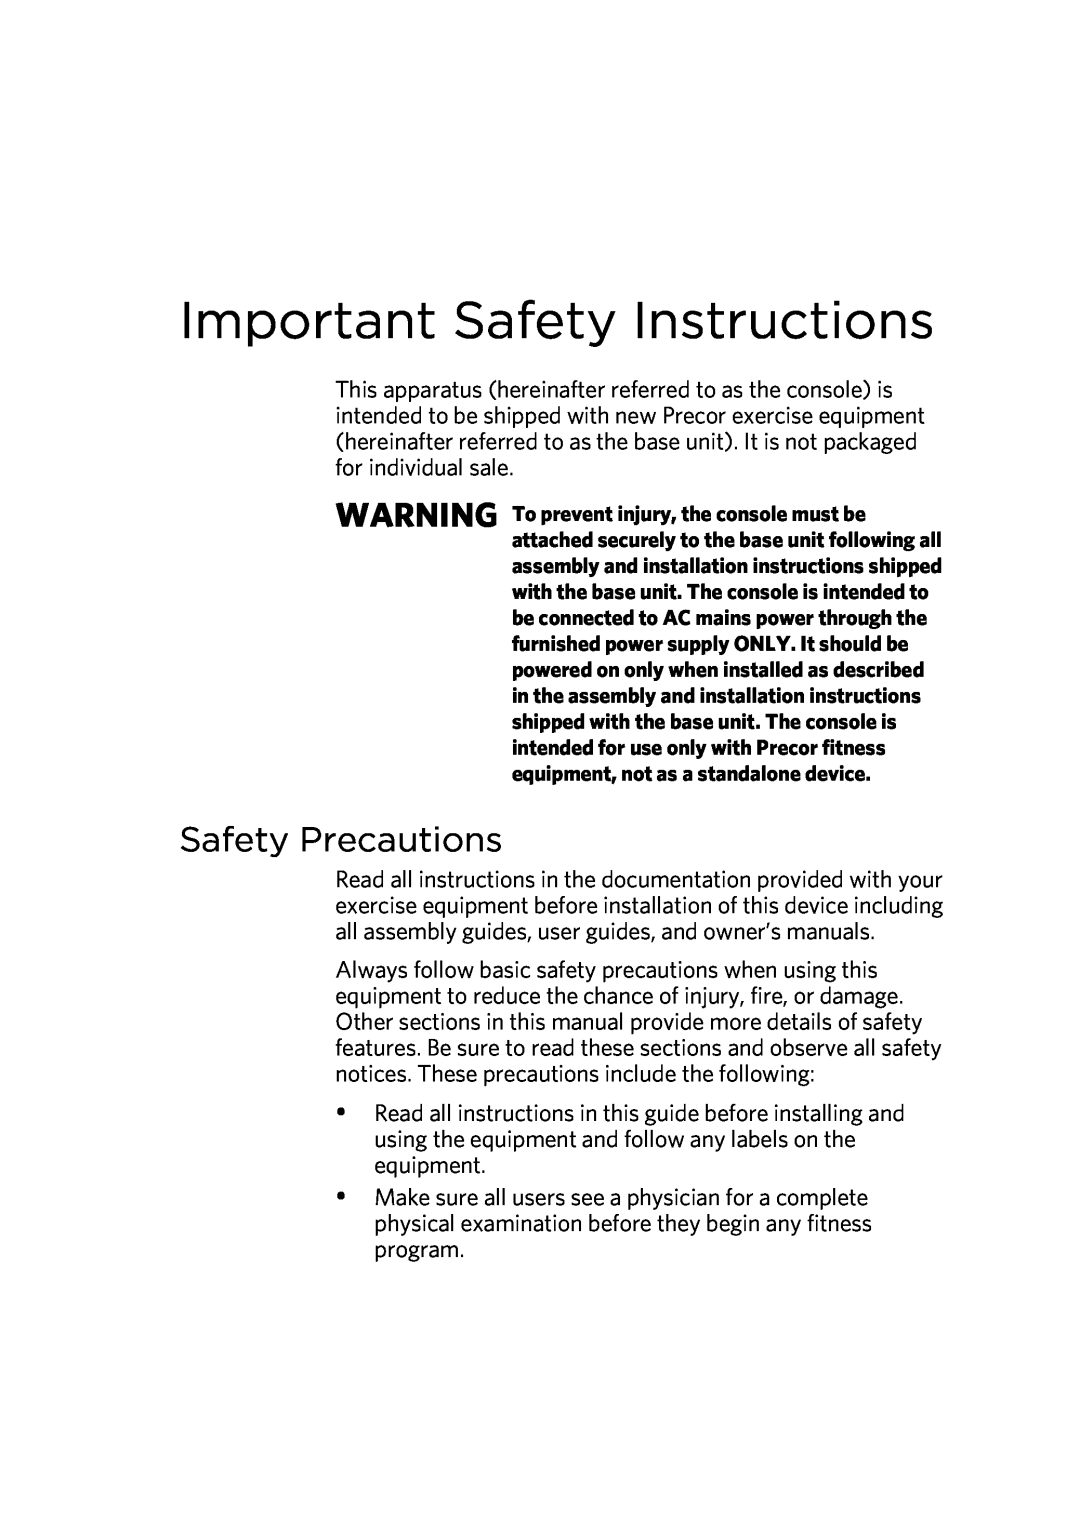 Precor 300753-201 manual Important Safety Instructions, Safety Precautions 